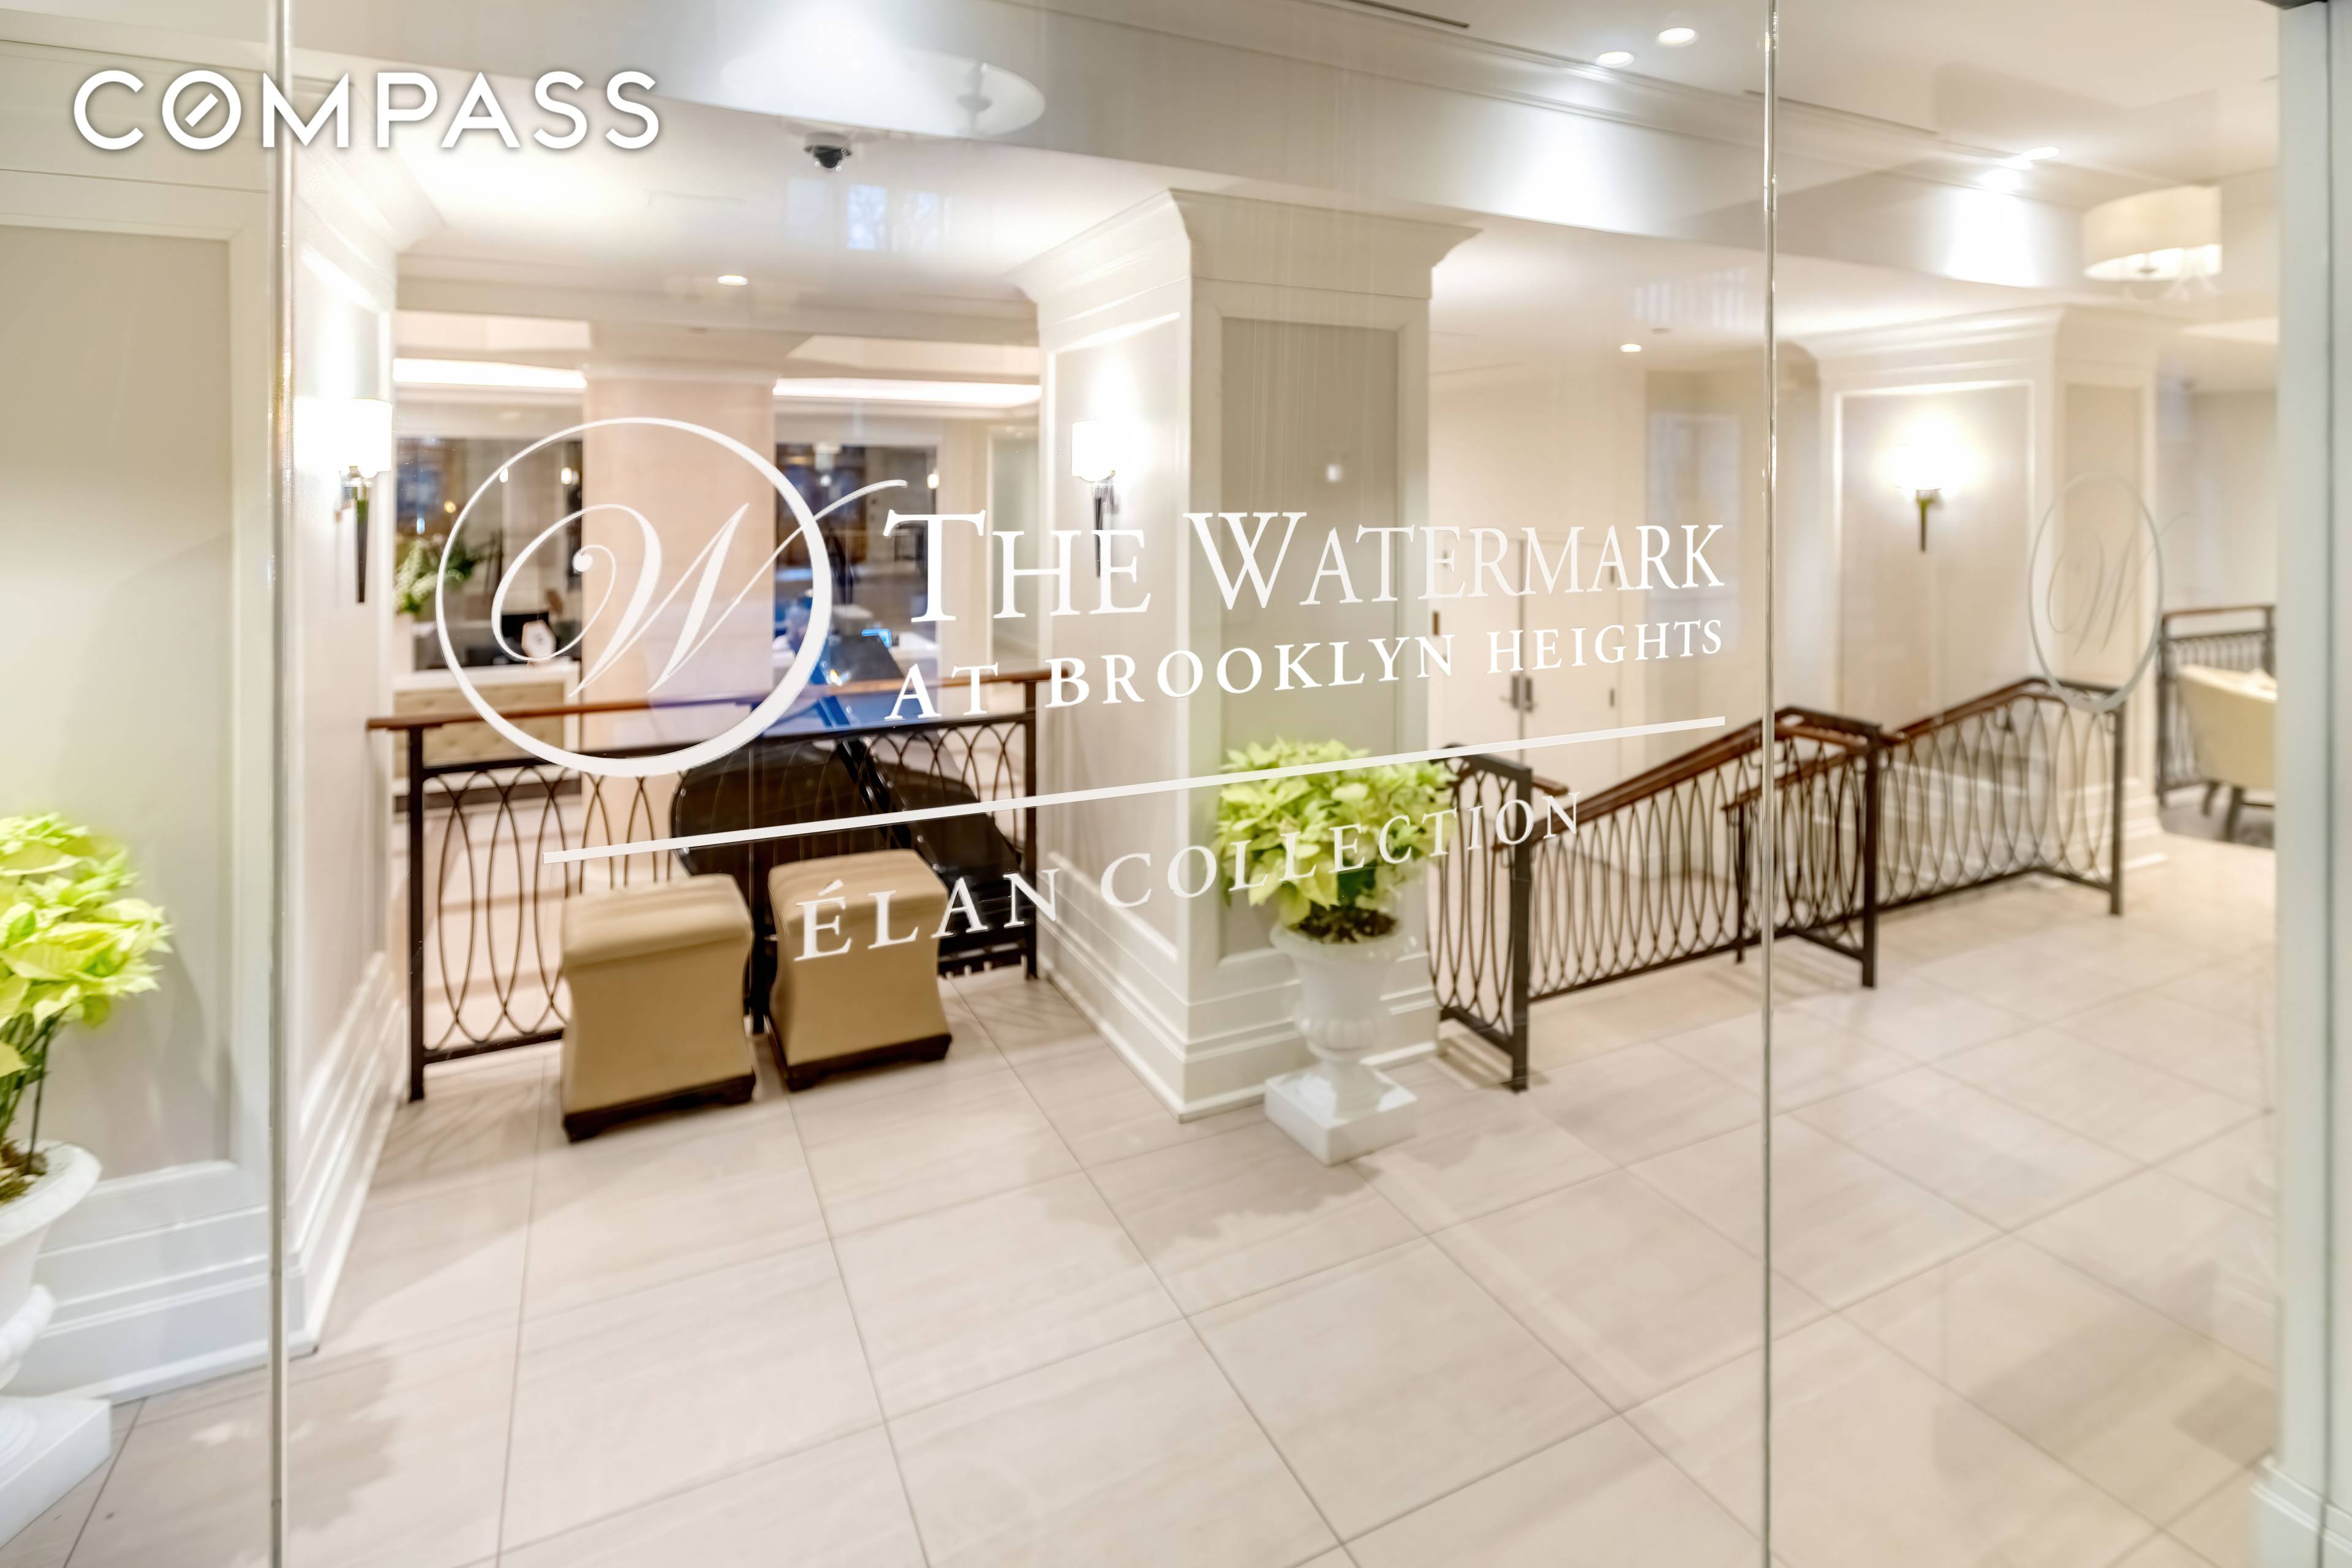 CONTEMPORARY COMFORTABLE CONVENIENT SENIOR LIVING COMMUNITY Apt 802 Assisted Living The Watermark at Brooklyn Heights is a senior living community located in the historic and beautifully renovated Leverich Towers Hotel.